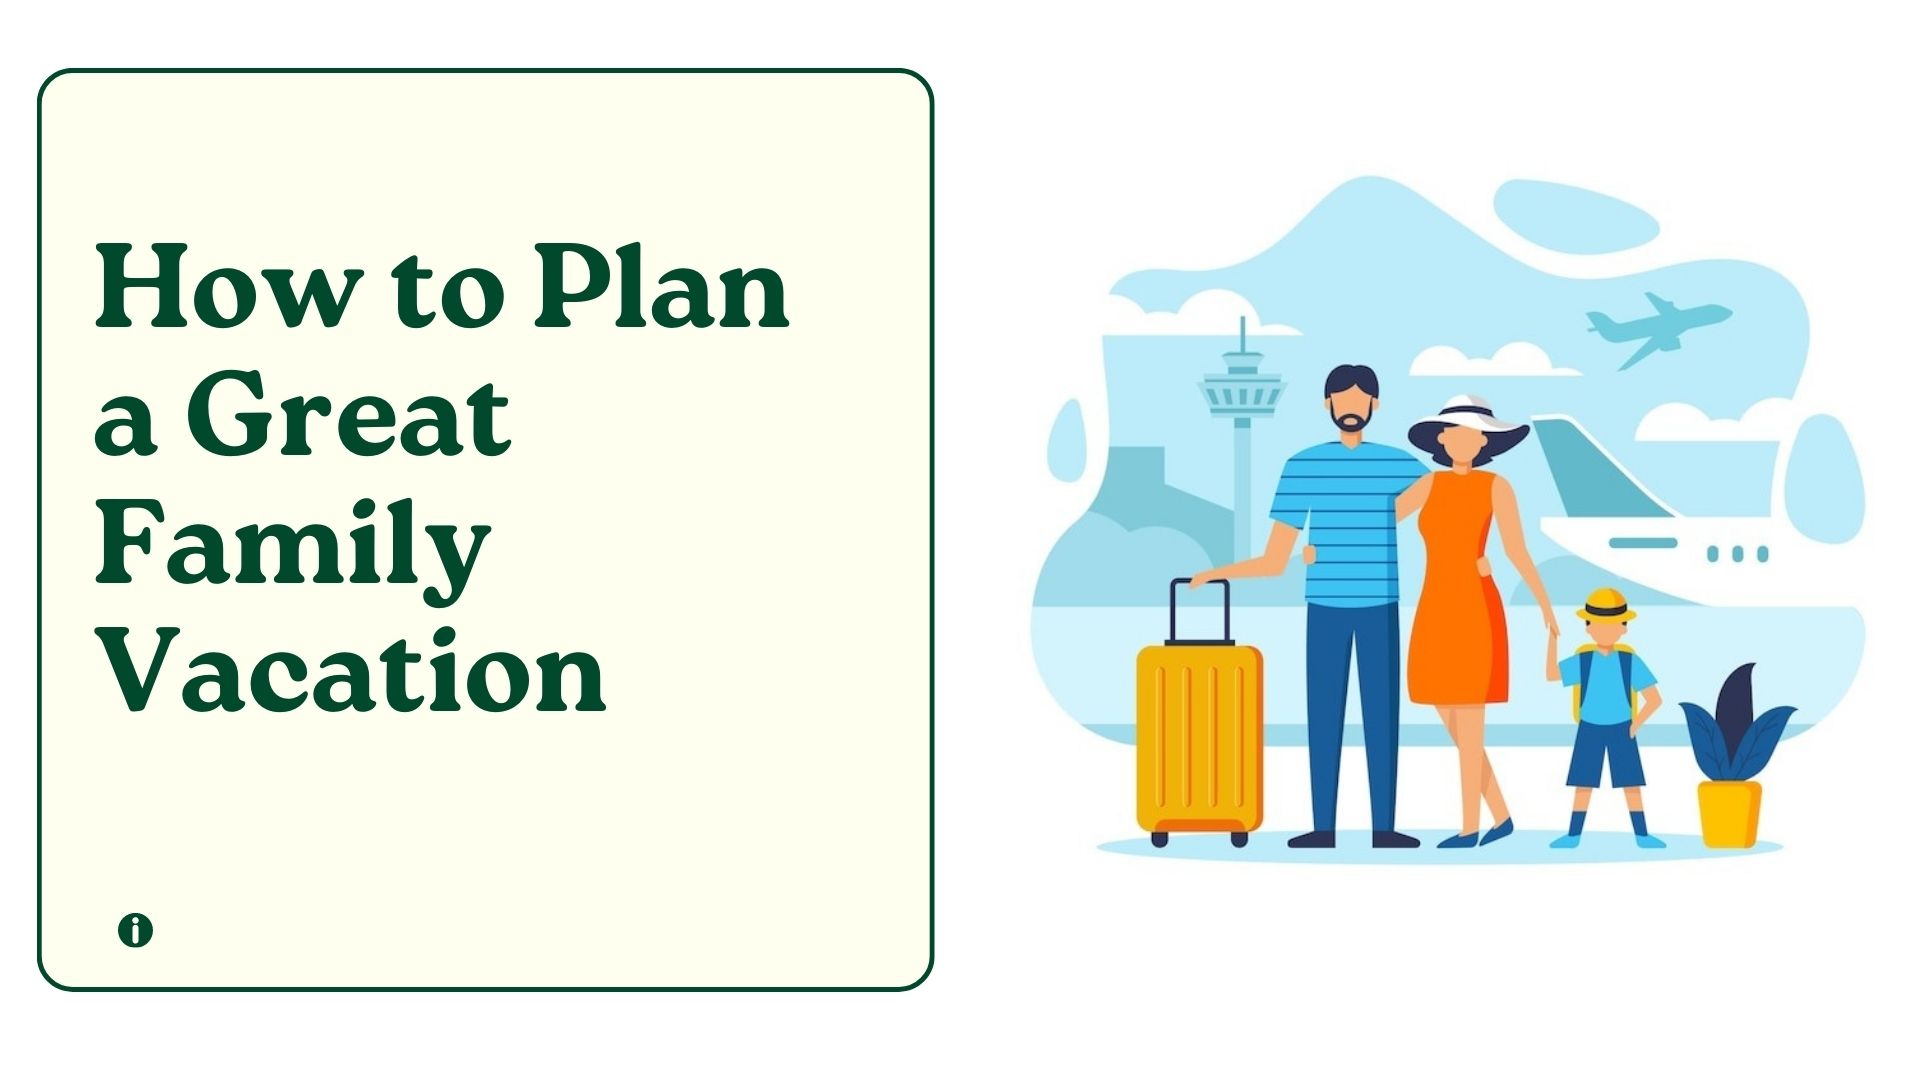 Plan a Great Family Vacation